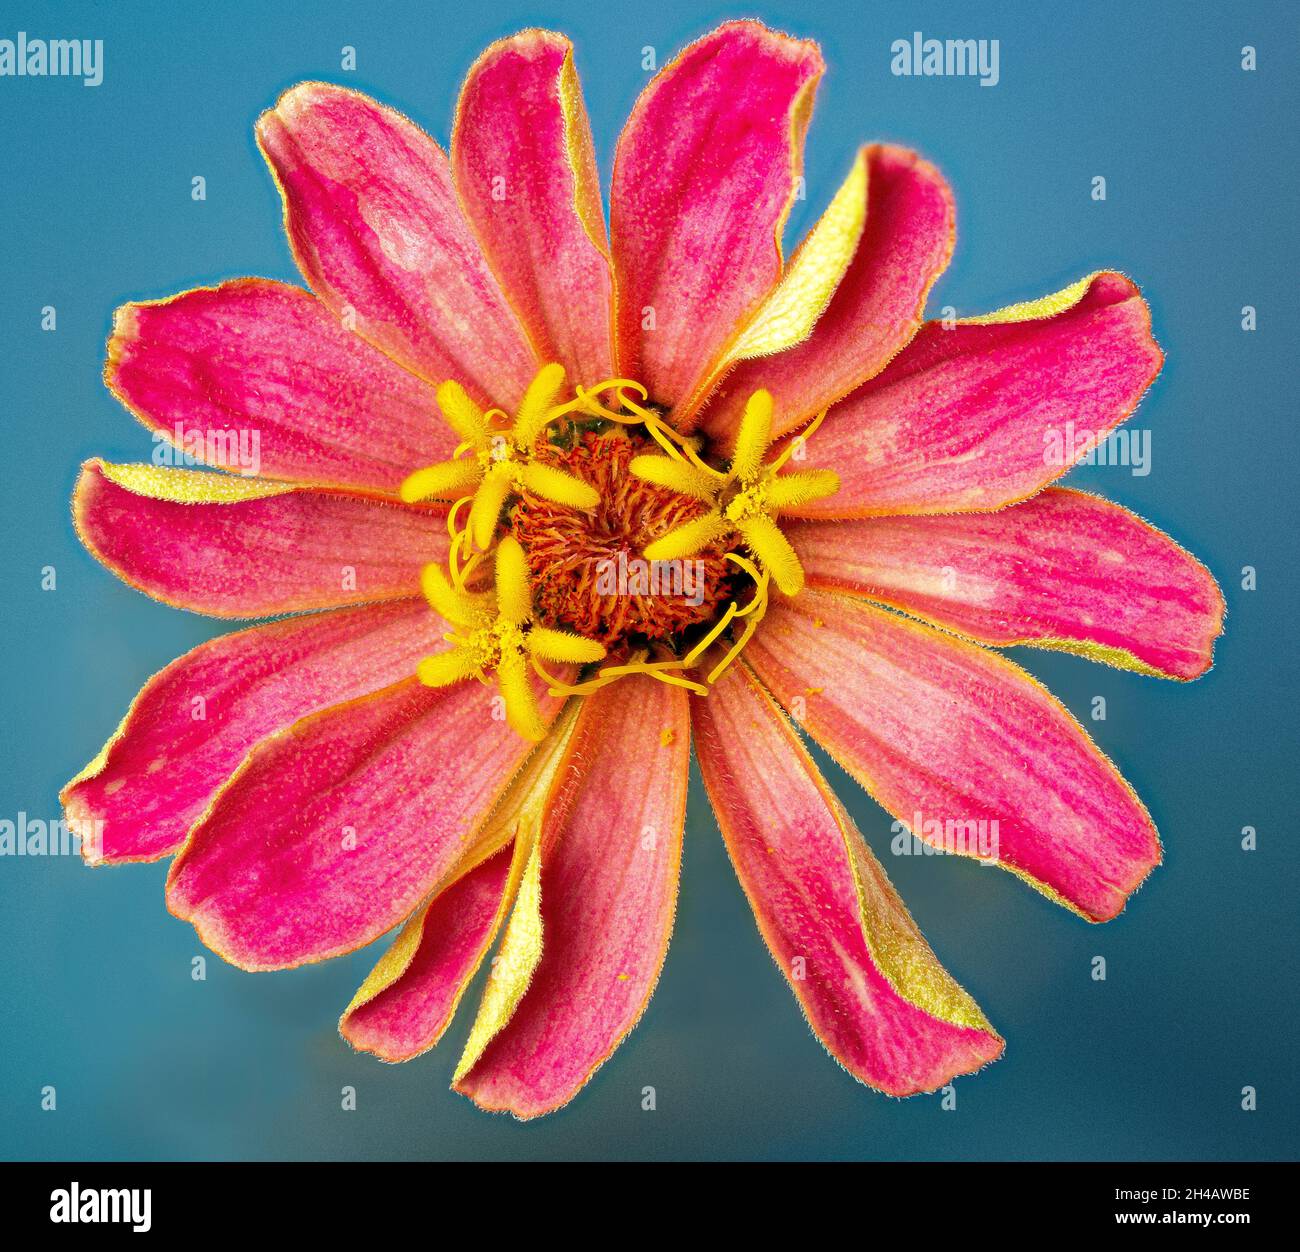 Macro view of center of pink zinnia flower, showing three 5-lobed disk florets and smaller and thinner stigma ray florets beneath them. Stock Photo